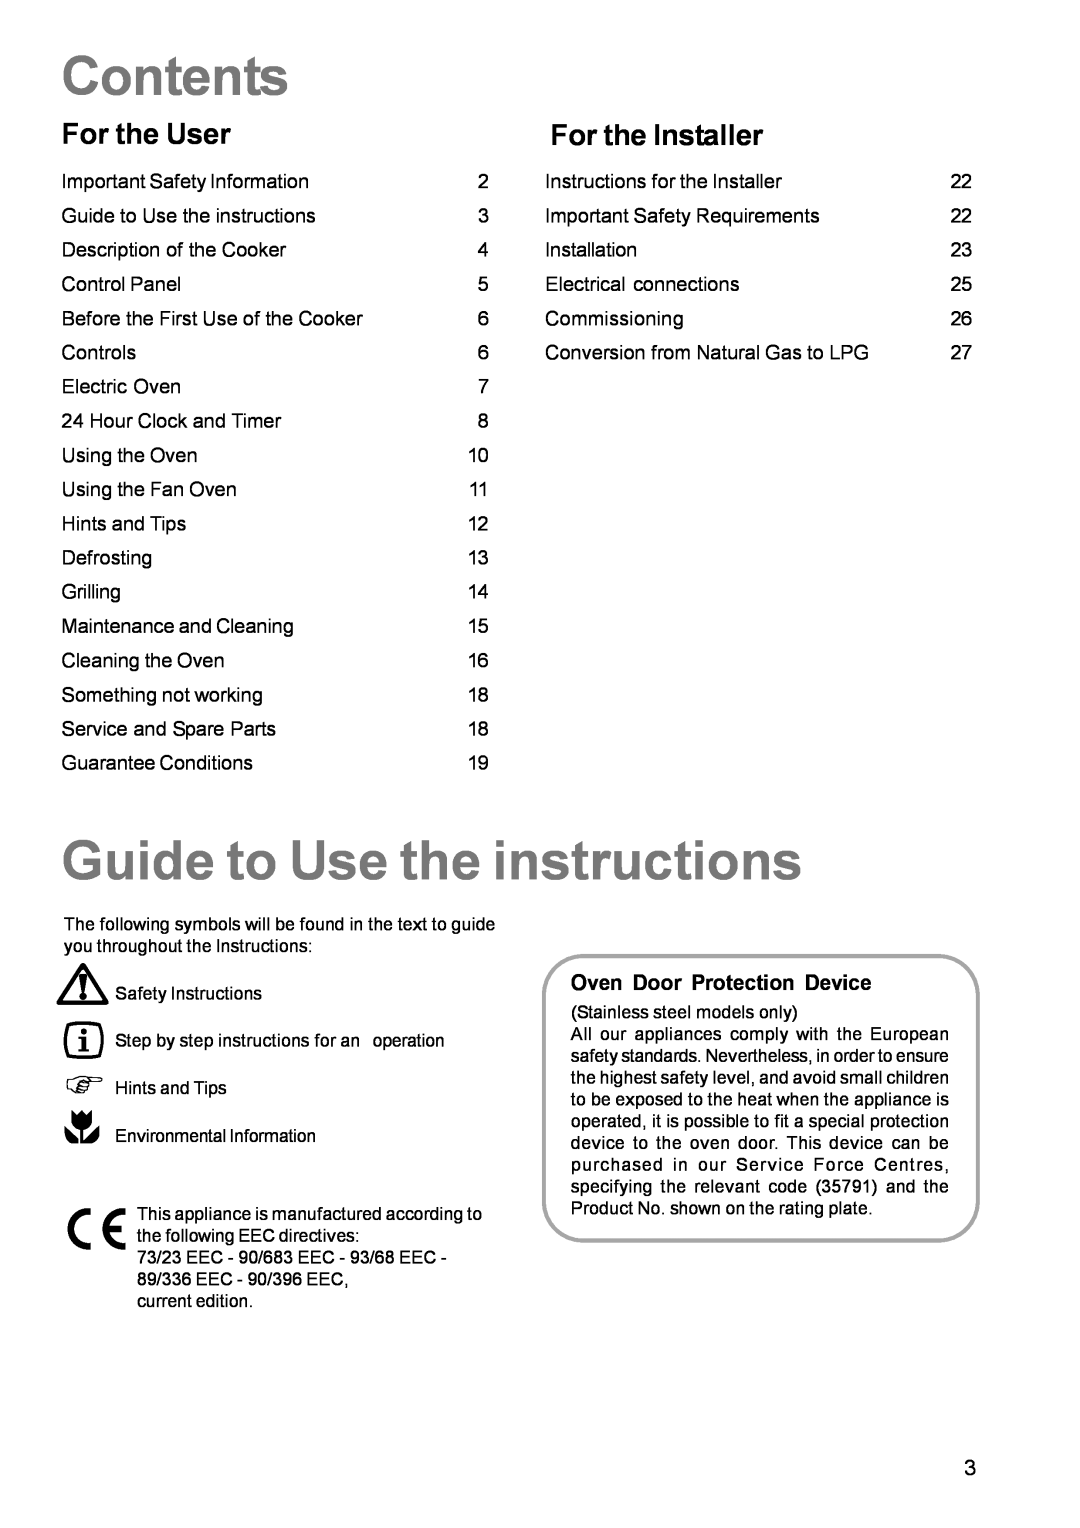 Zanussi ZCM 600 Contents, Guide to Use the instructions, For the User, For the Installer, Oven Door Protection Device 